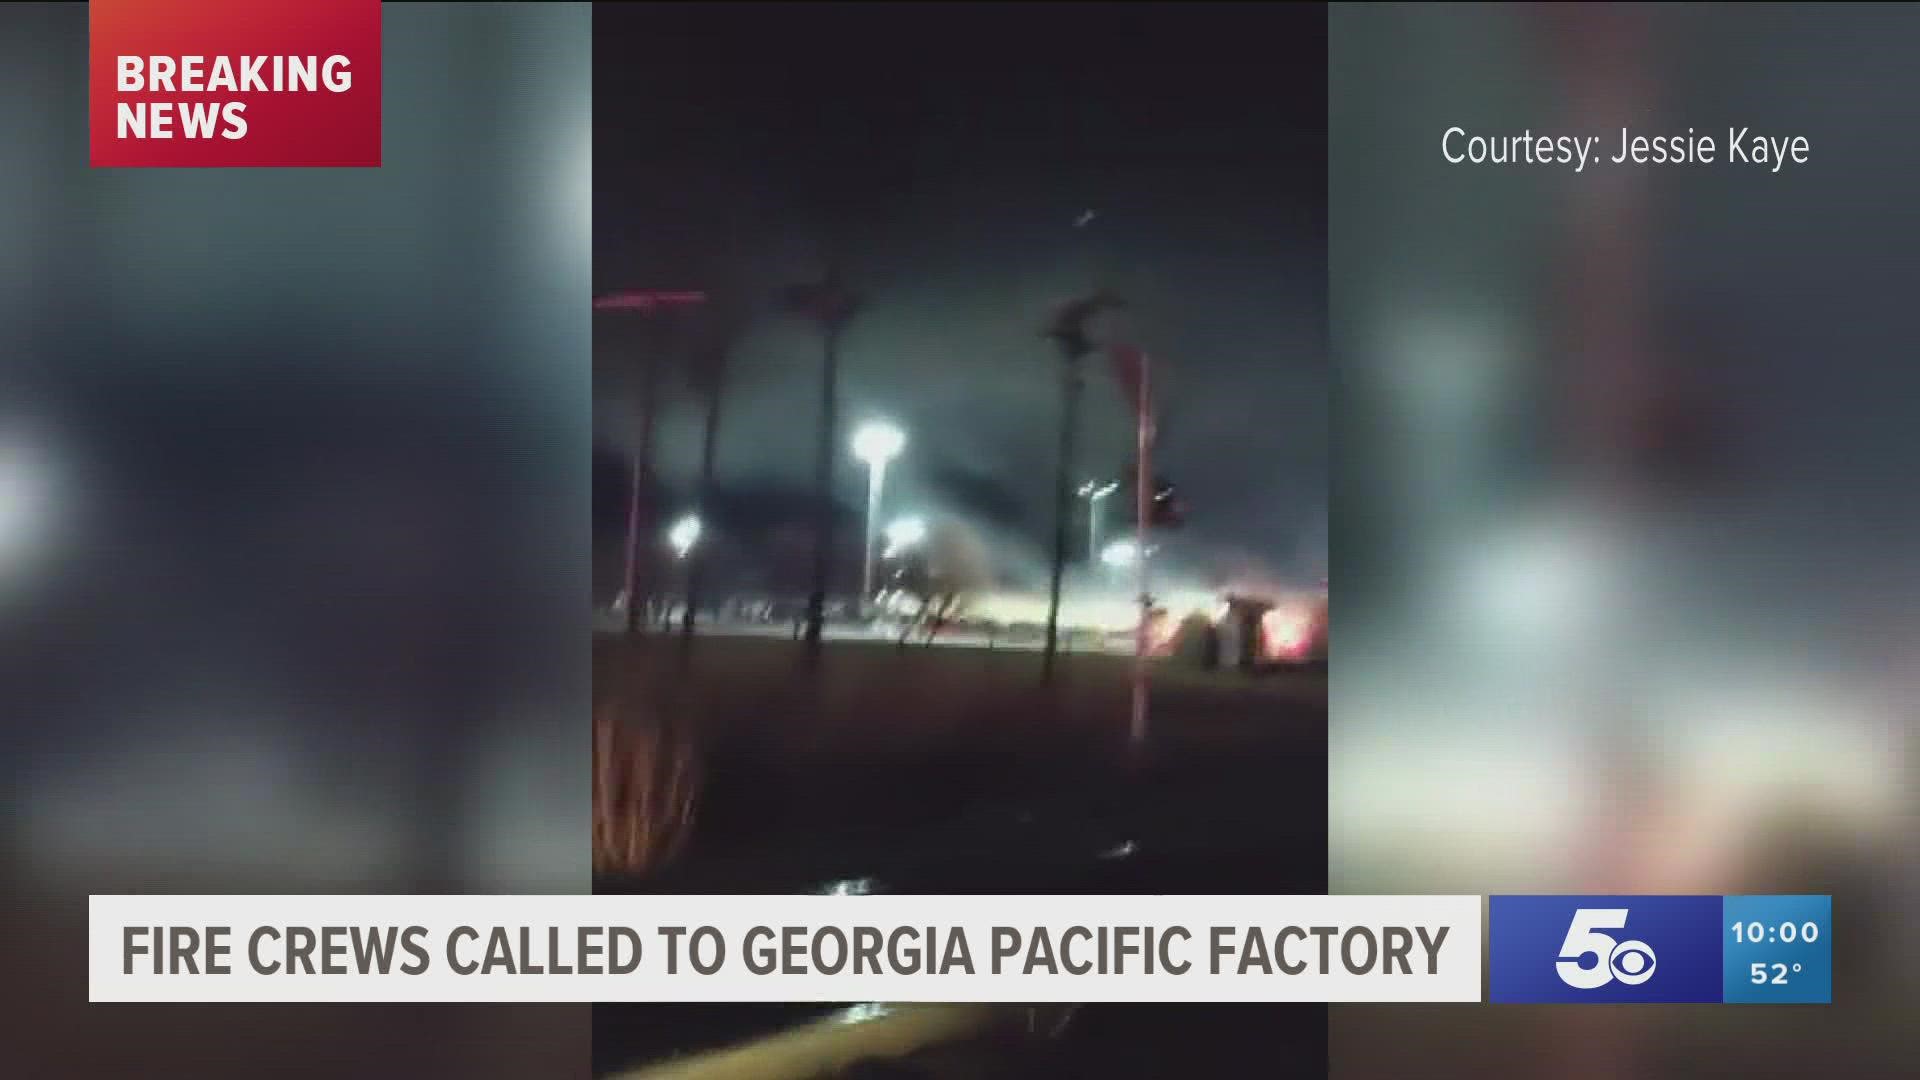 Emergency crews responded to an electrical fire at the plant Tuesday evening. The fire was contained but created a lot of smoke, causing employees to evacuate.